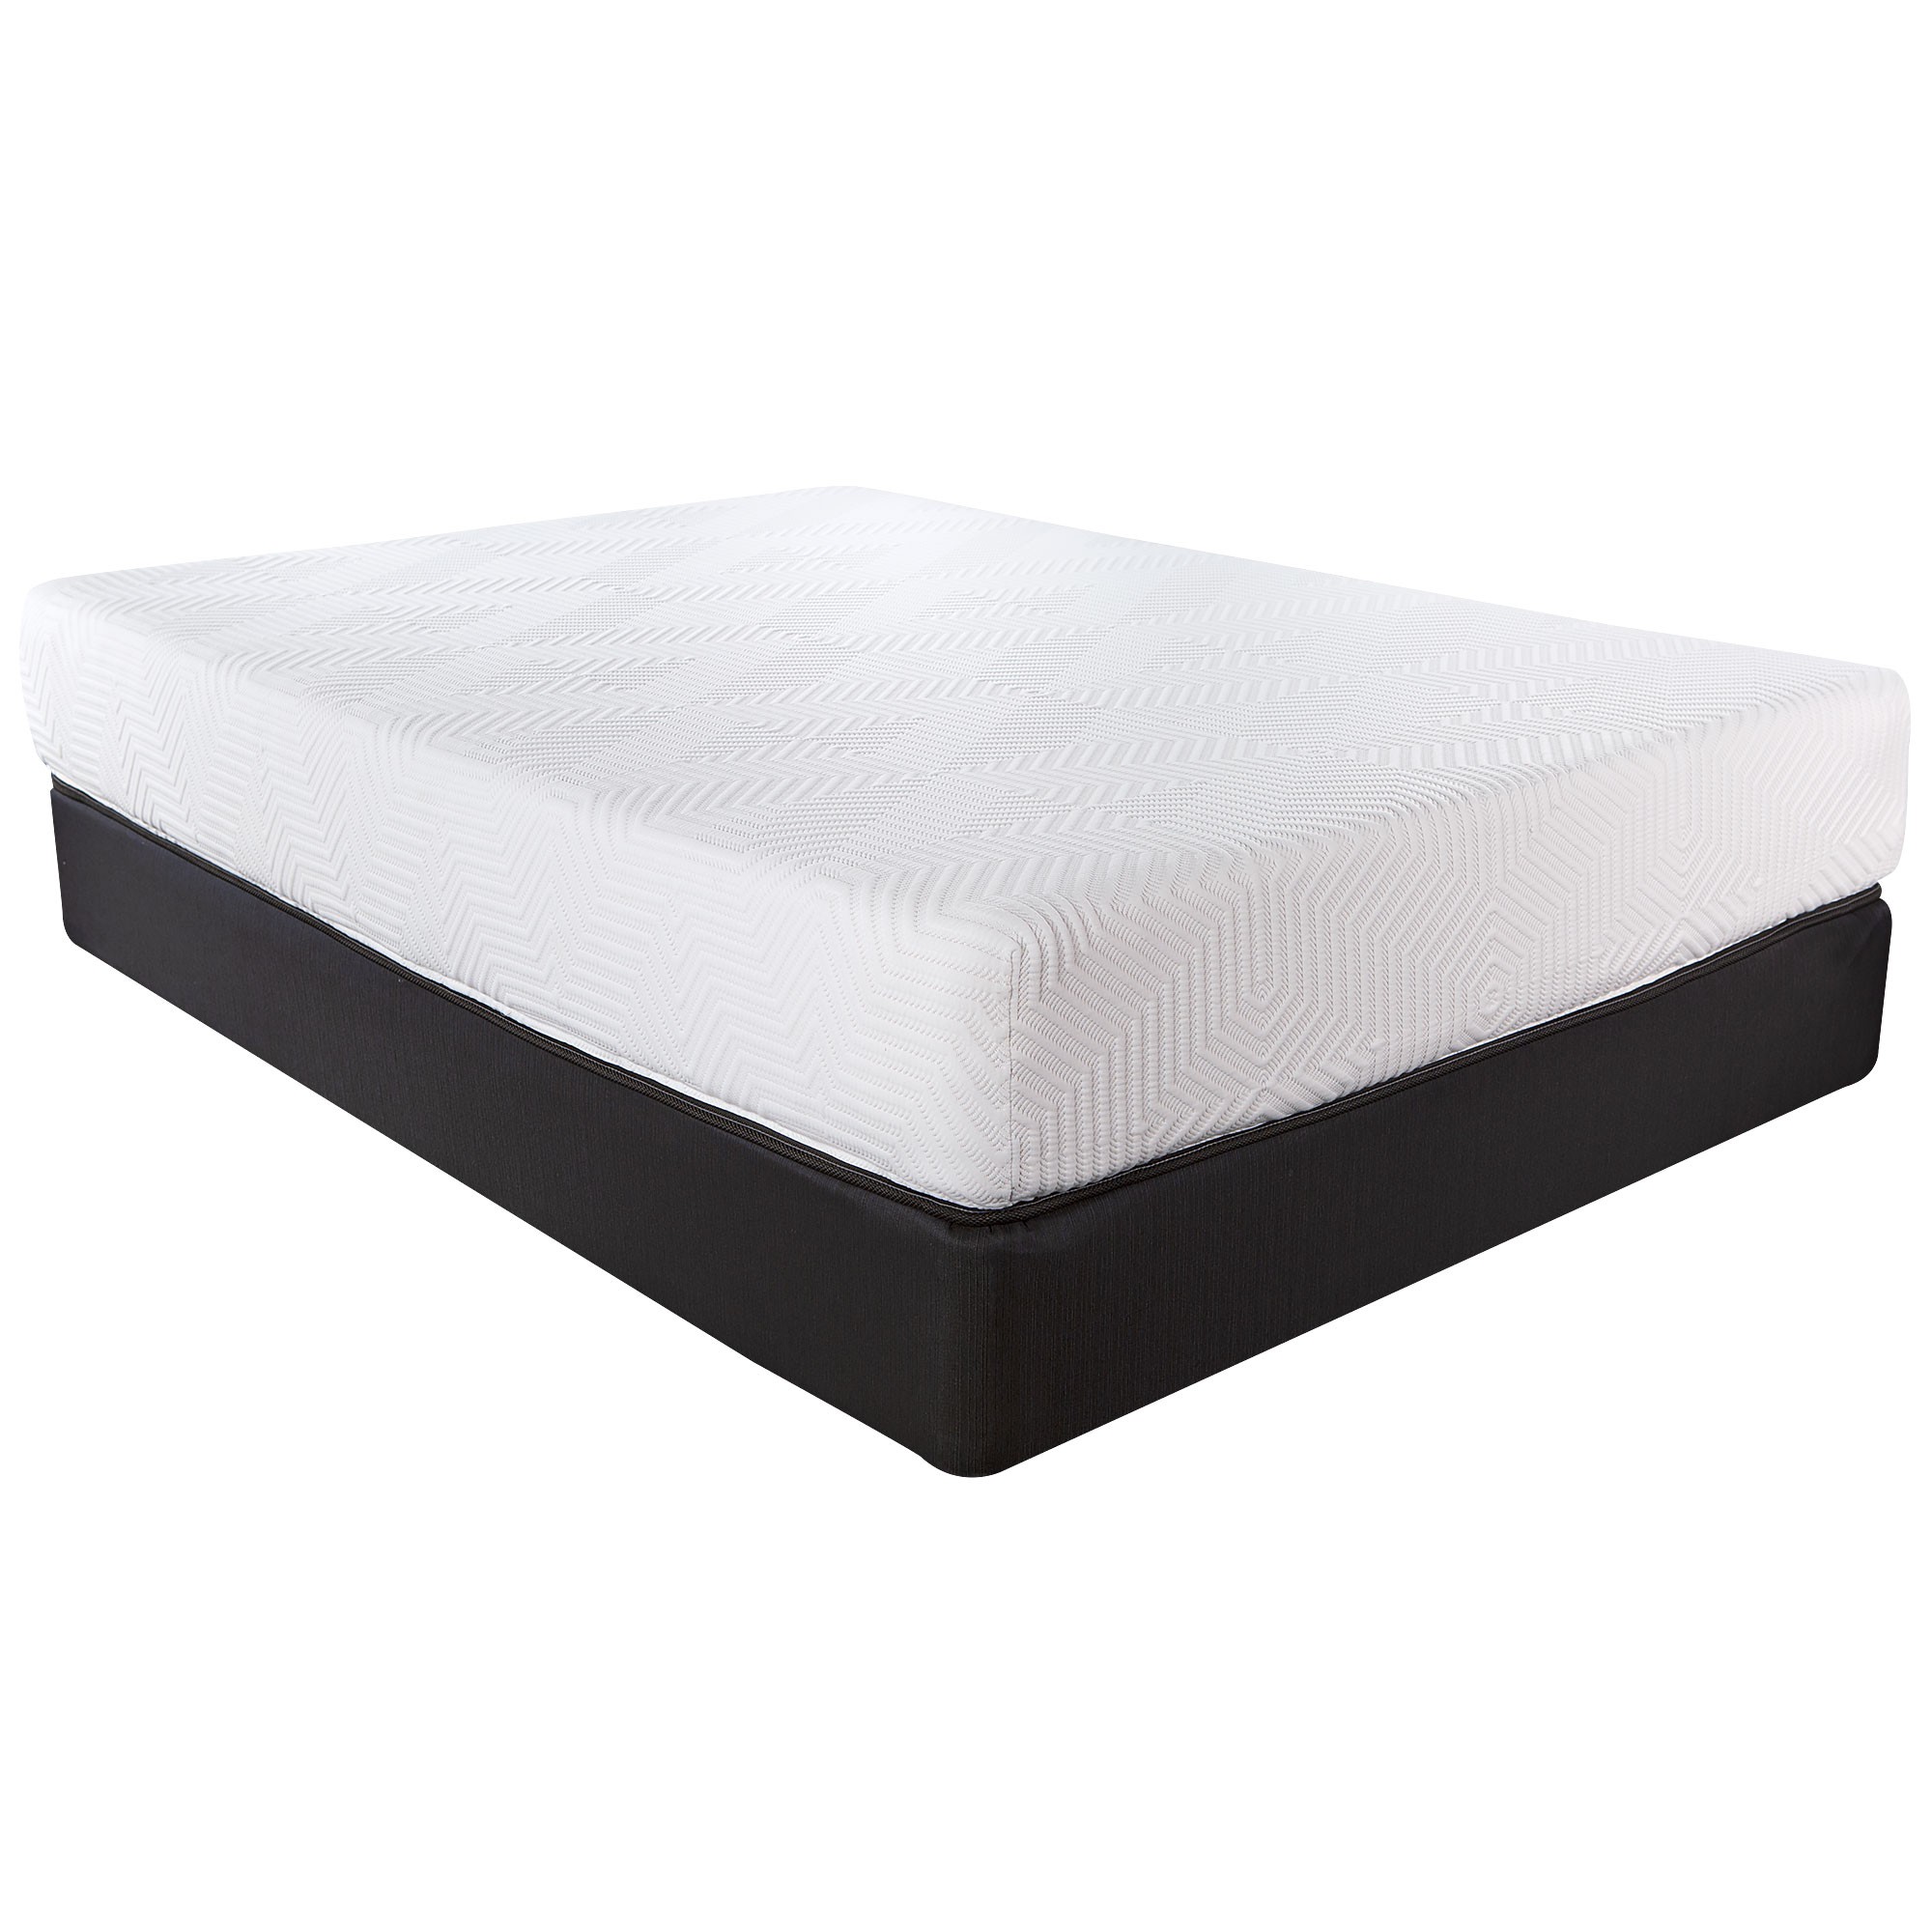 10.5" Hybrid Lux Memory Foam And Wrapped Coil Mattress Twin-391626-1